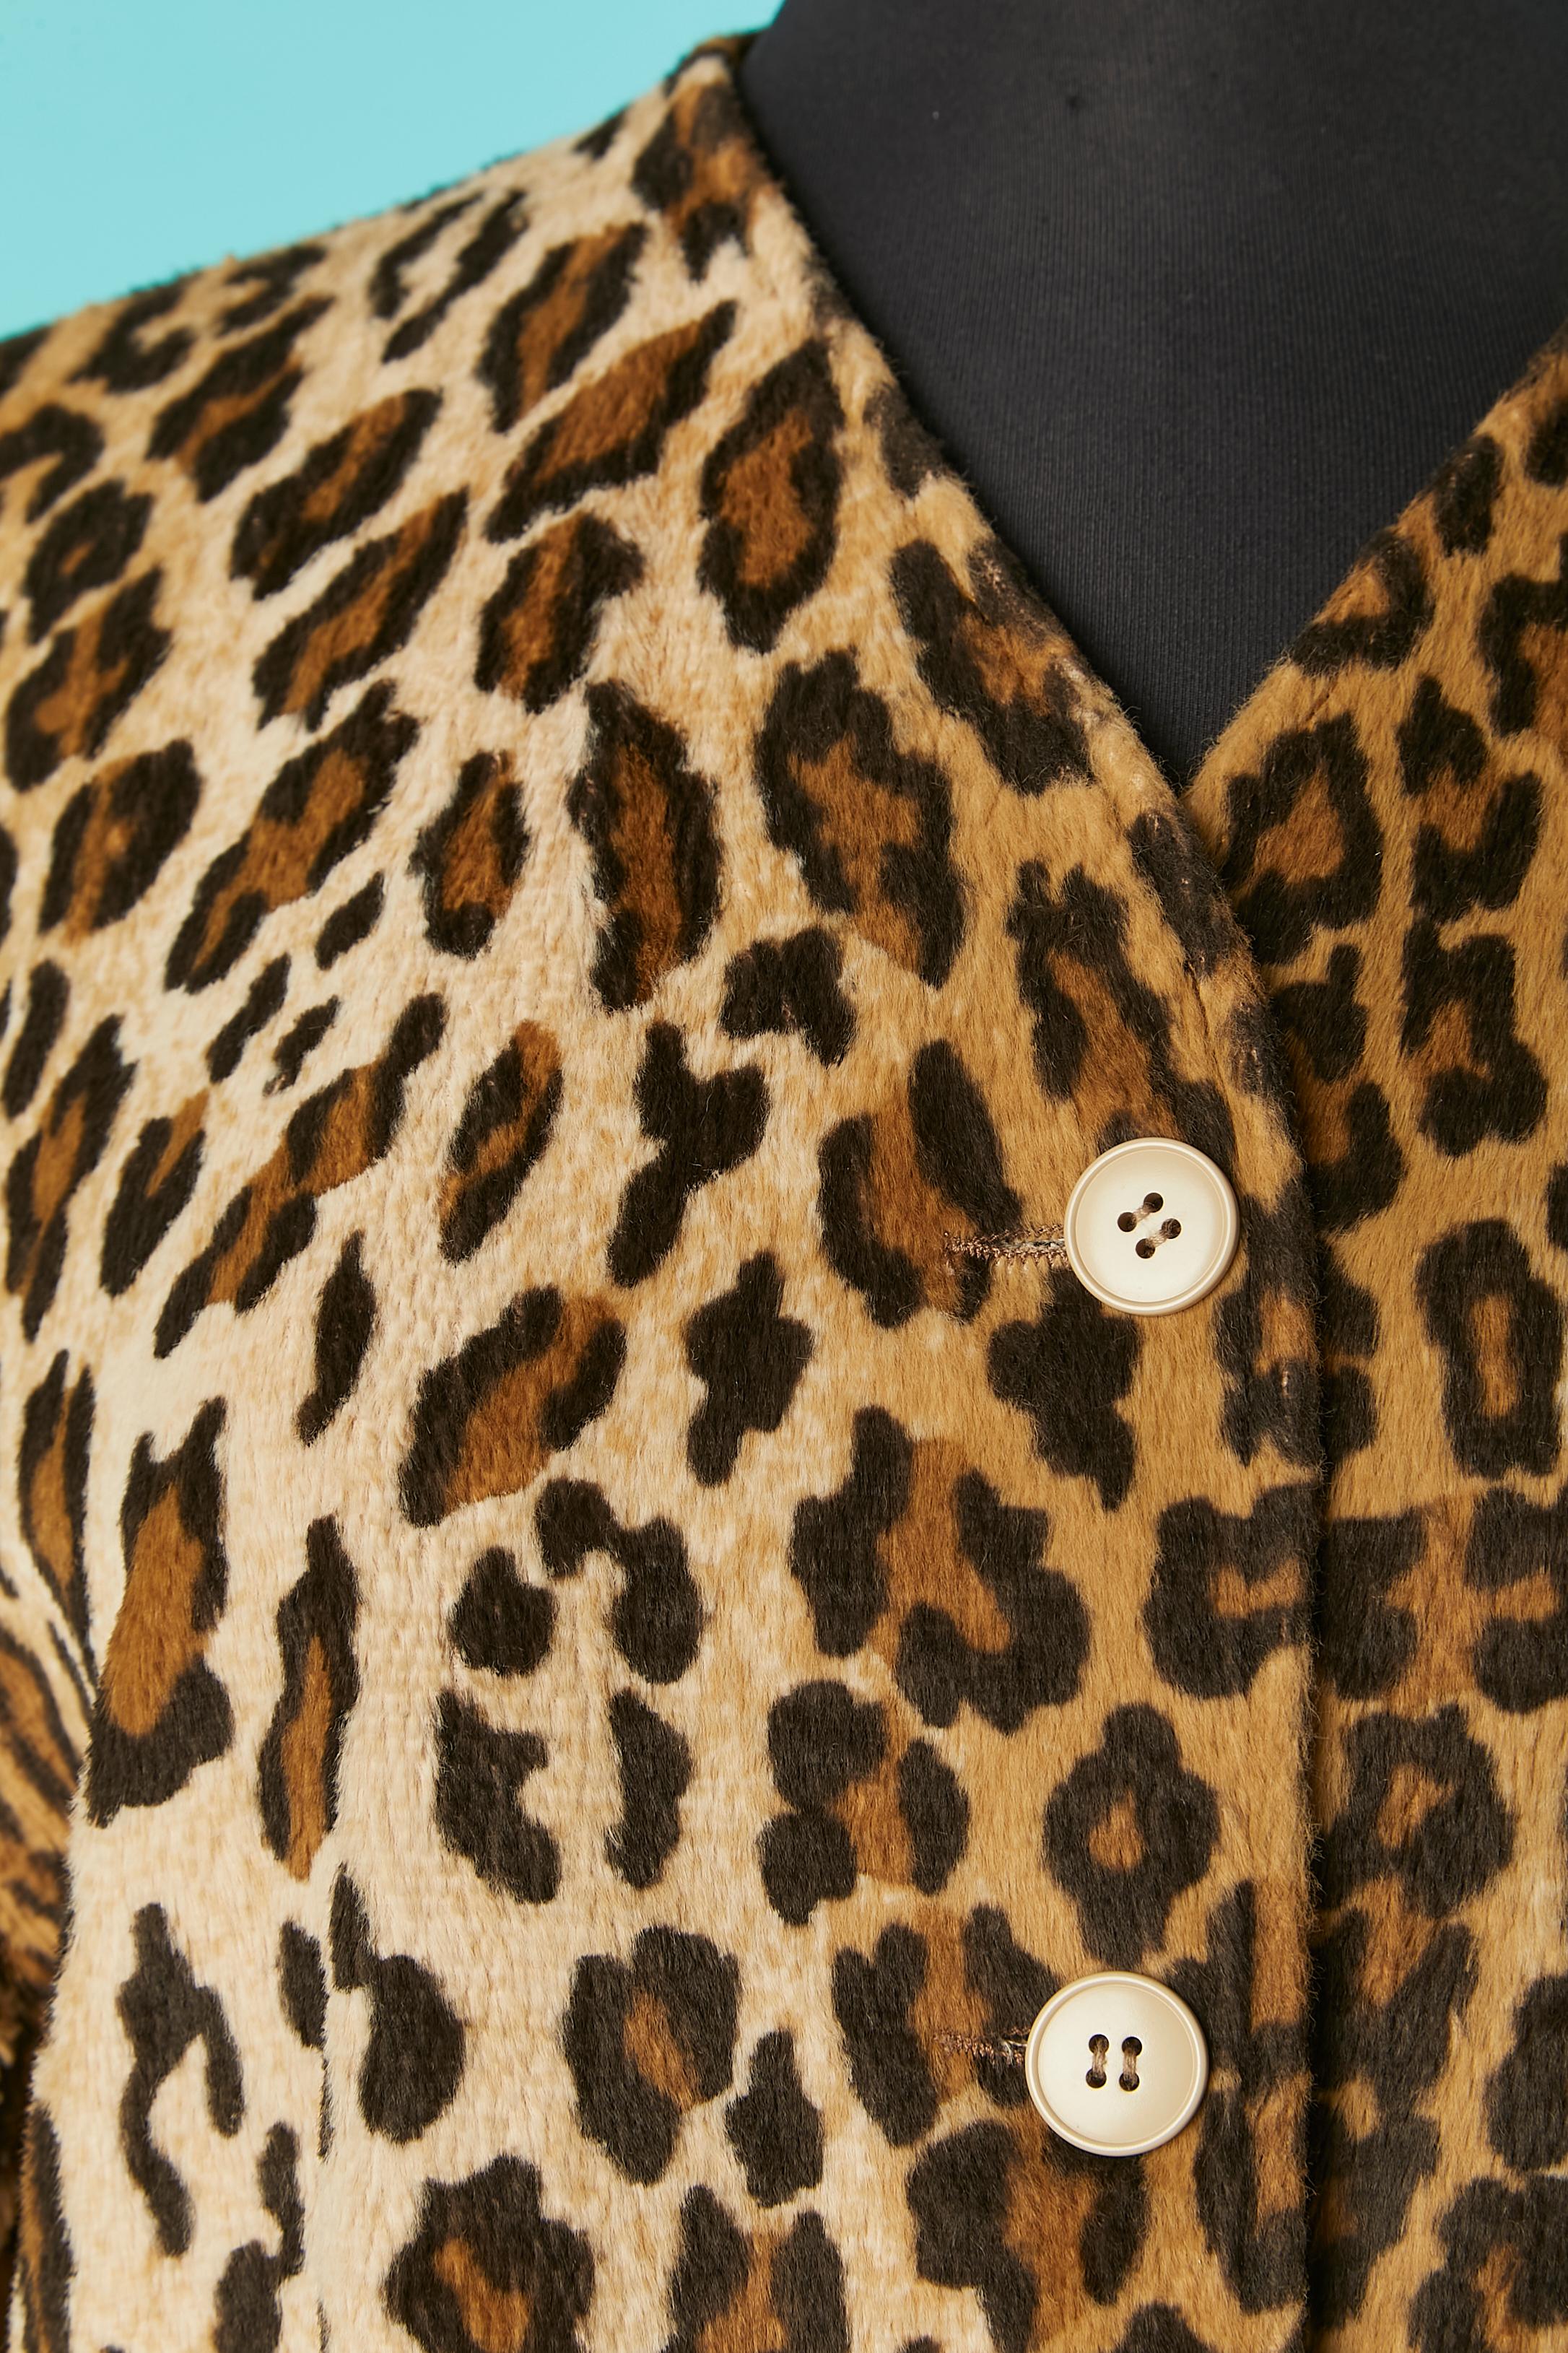 Faux fur leopard print single-breasted jacket. Main fabric composition: 100% viscose. Lining: 100% acetate. Pocket's lining: 100% cotton. 
SIZE 40 (Fr) 10 (Us) 